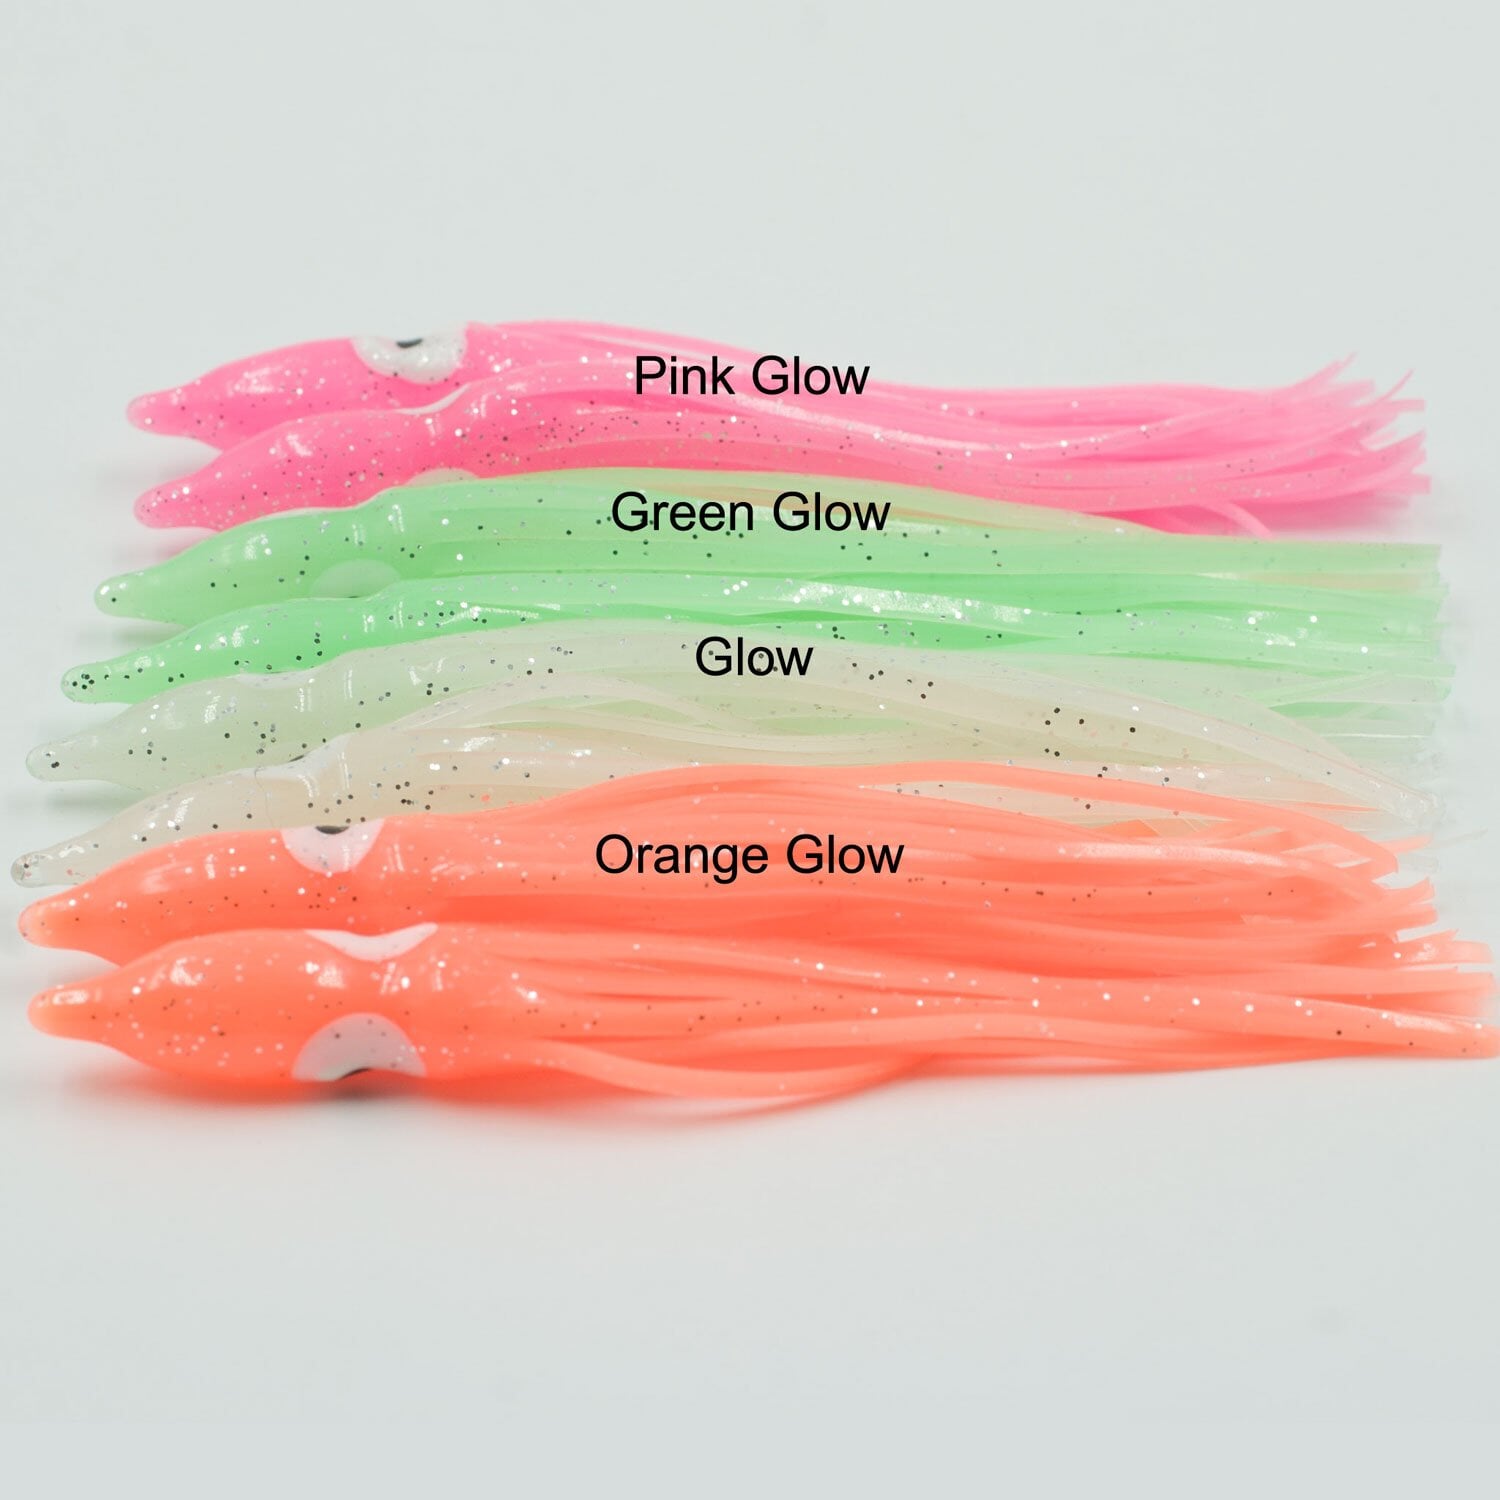 Run Off Super Glow Squid Skirts - 6, 12, 18 PC Packages - 3 & 4.5 Length Natural Glow / 6 Pieces / 4.5